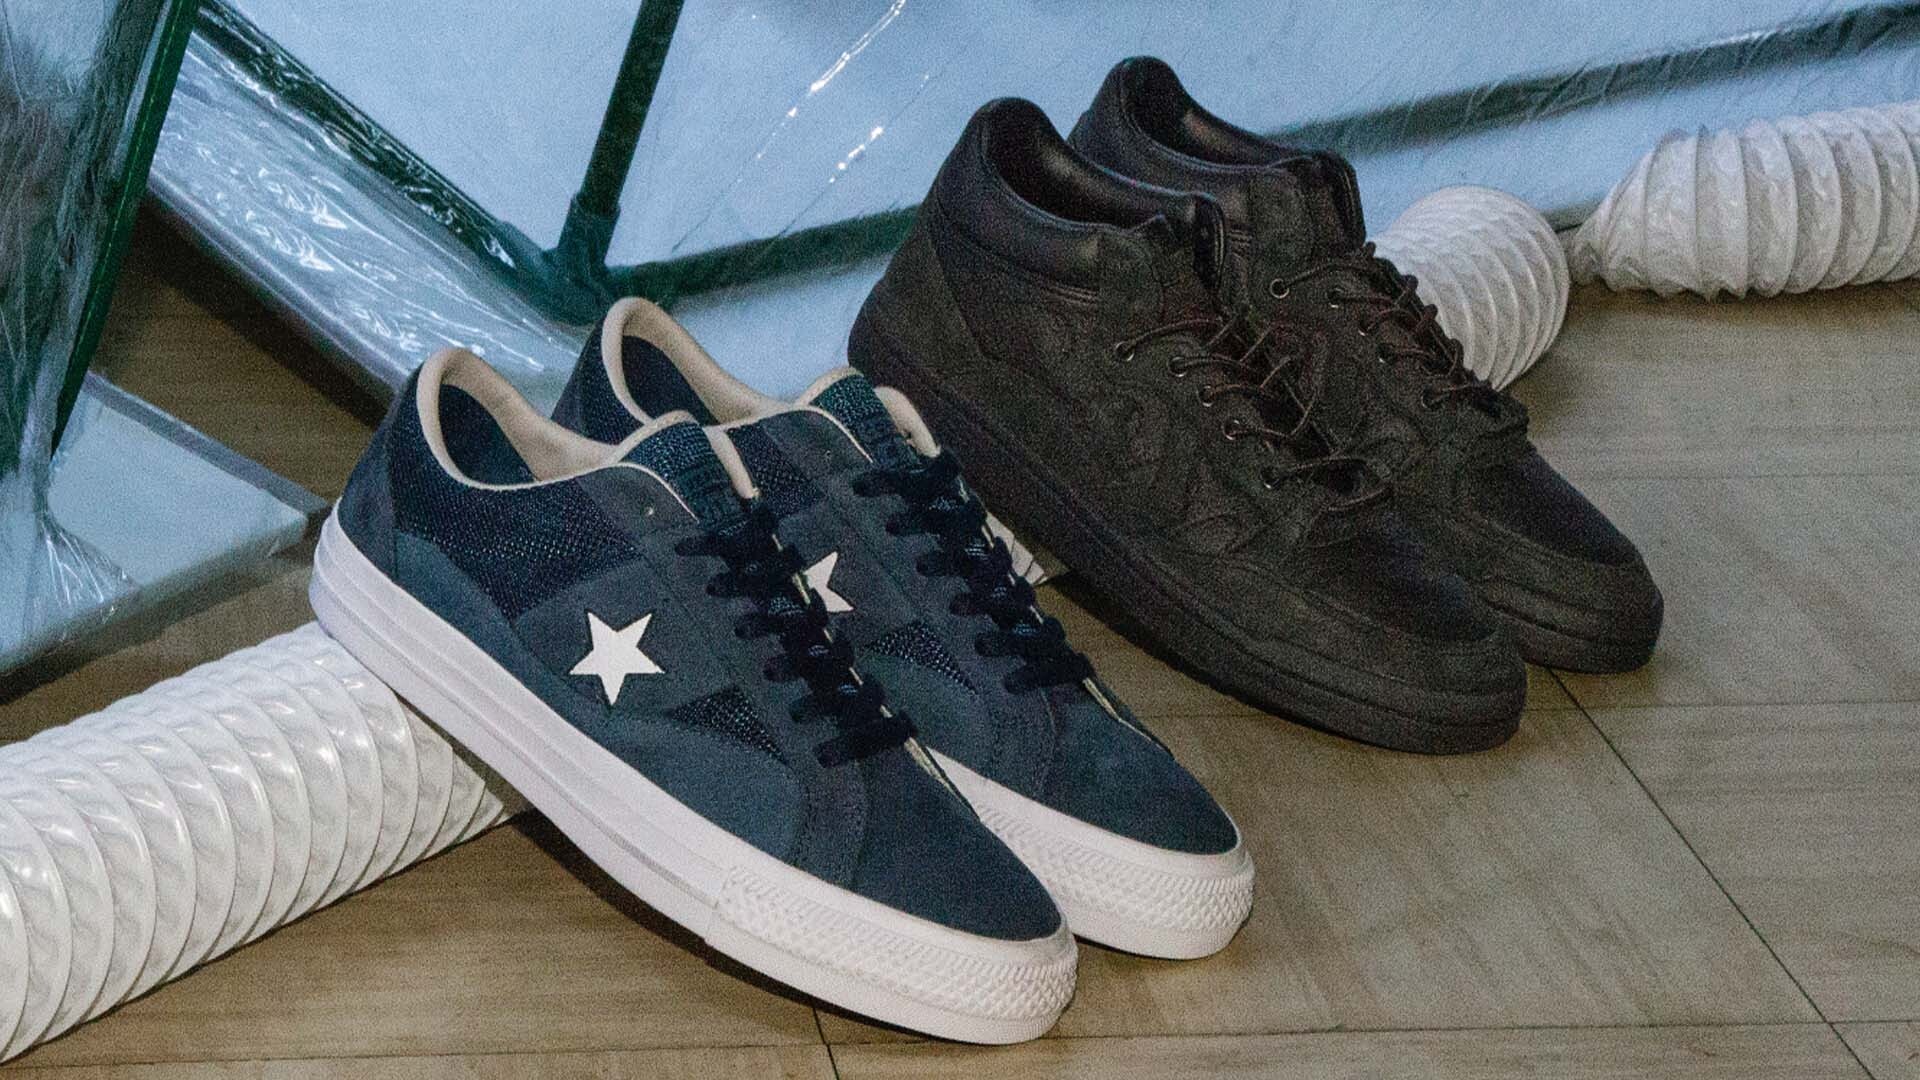 Alltimers and Converse Skate Shoe Collaboration